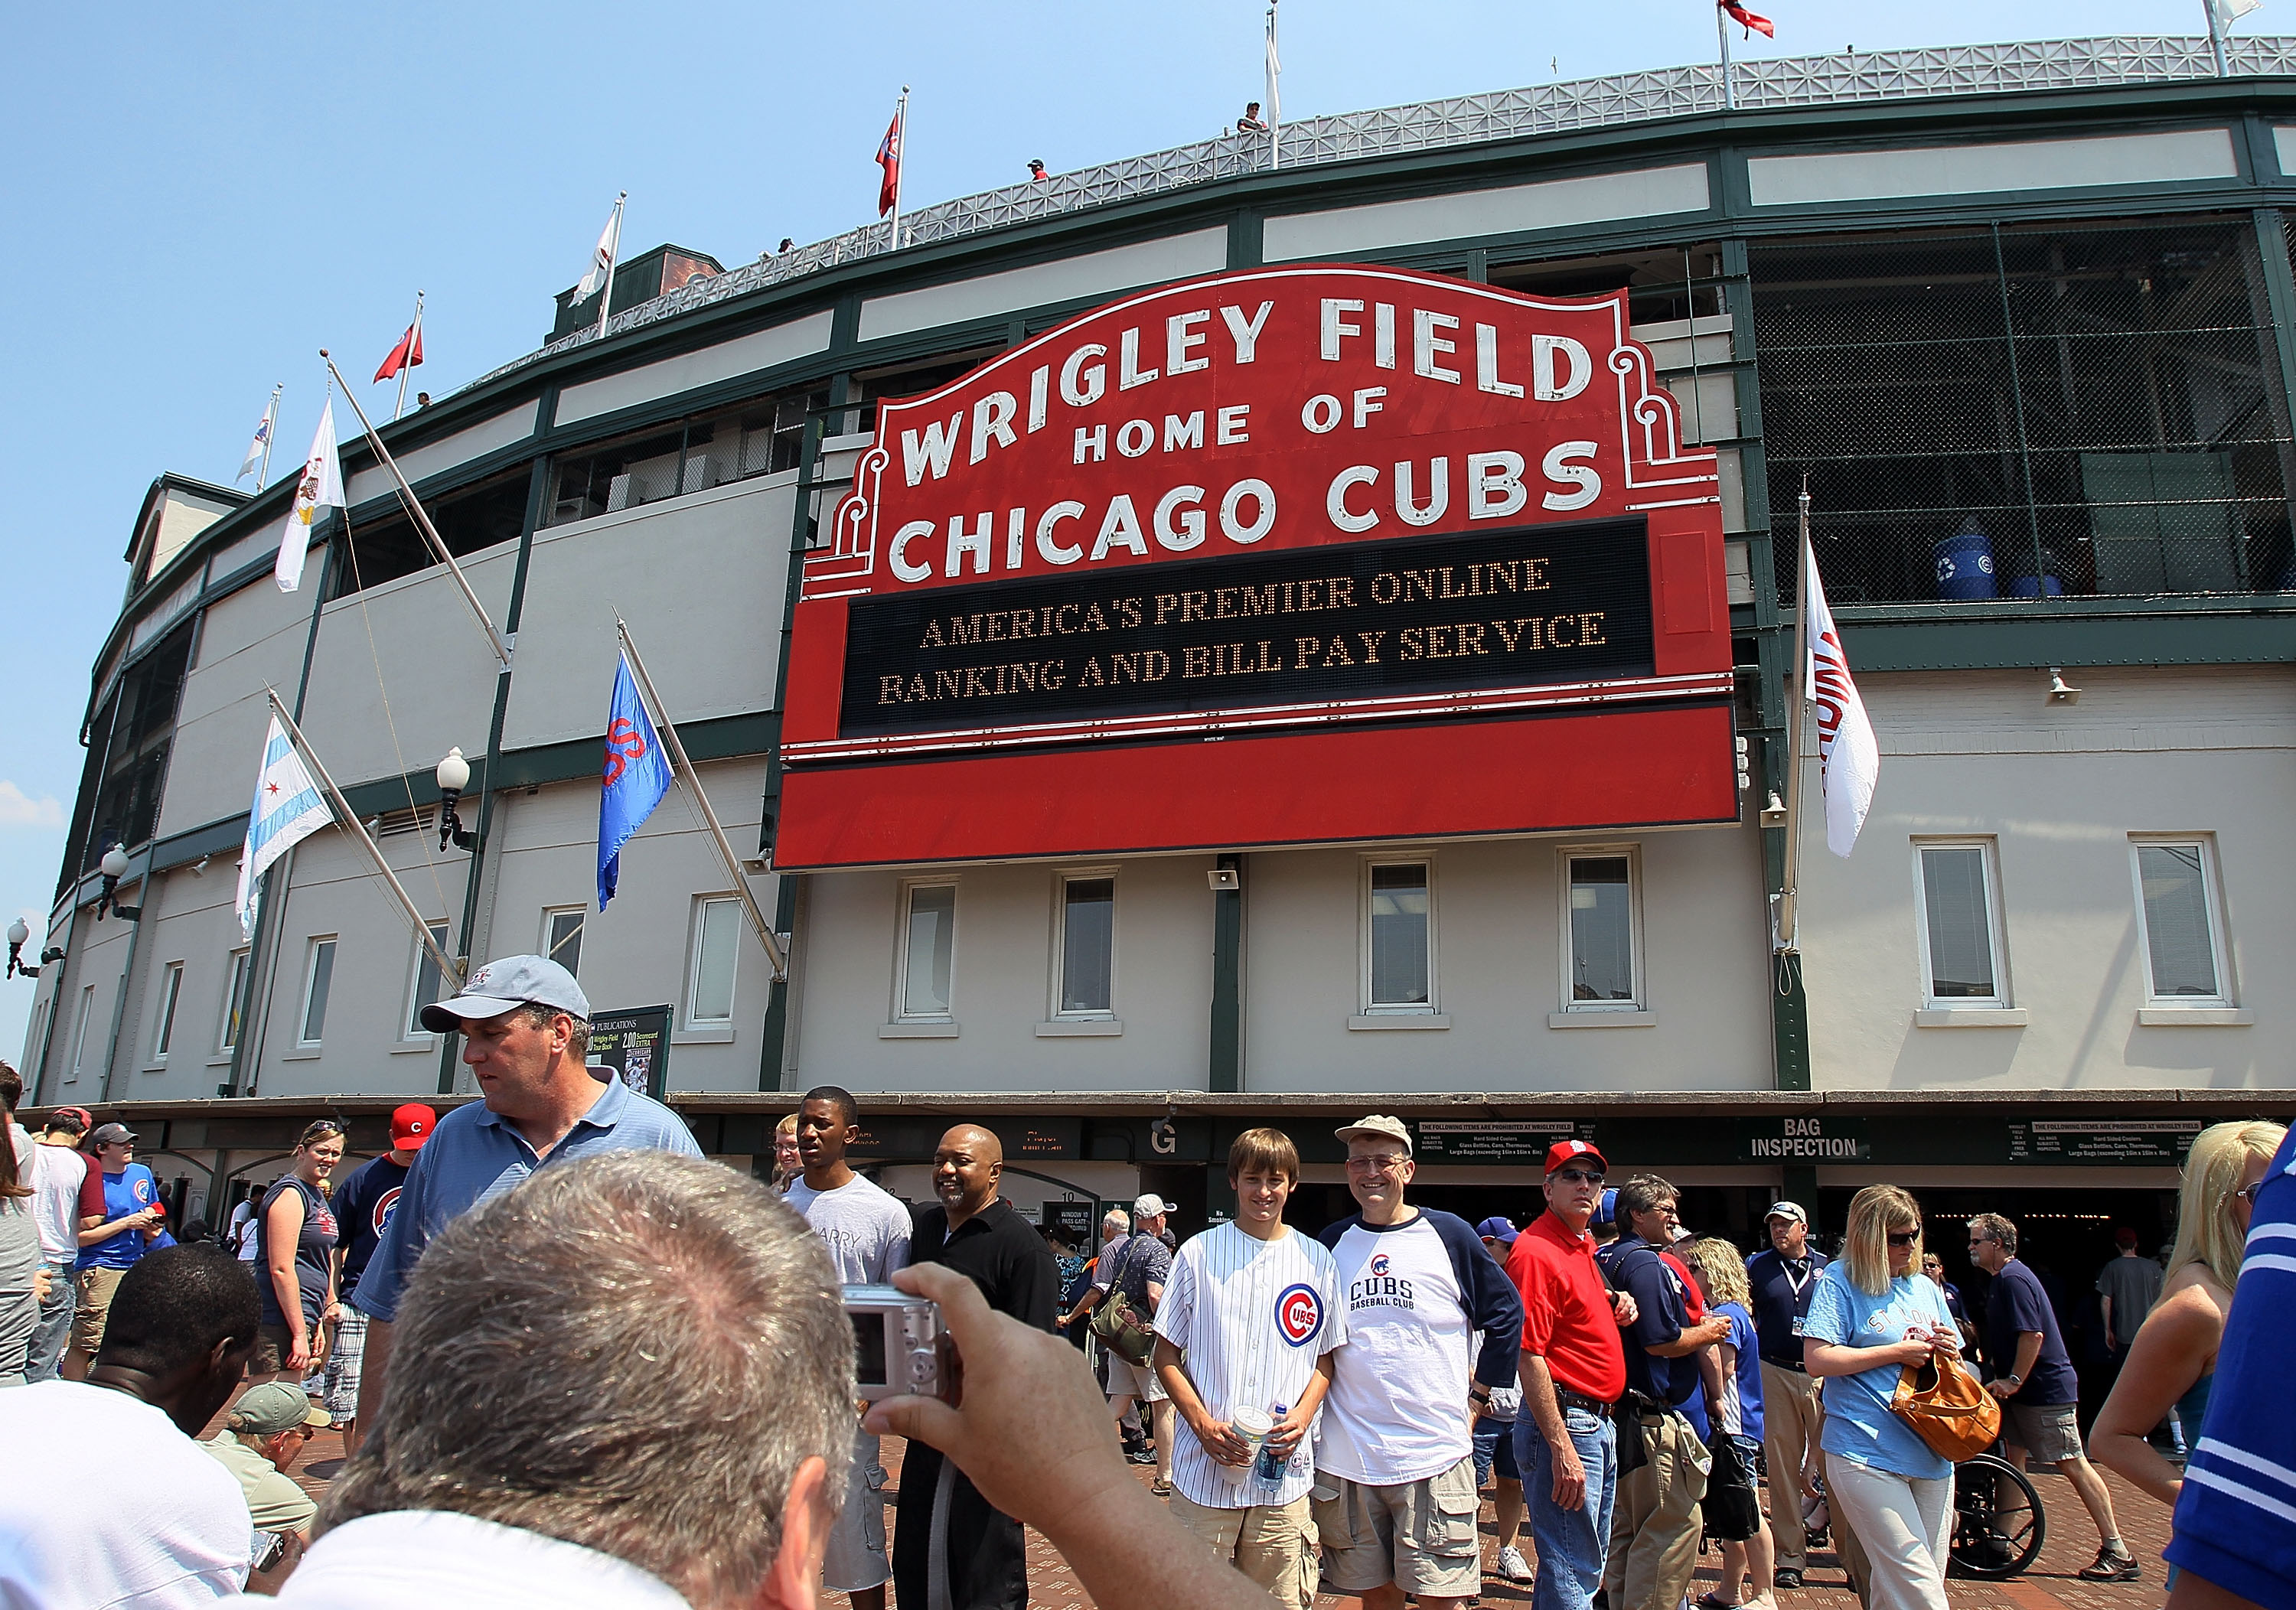 CHICAGO - MAY 30:  Fans arrive for the game between the St. Louis Cardinals and the Chicago Cubs on May 30, 2010 at Wrigley Field in Chicago, Illinois.  (Photo by Jim McIsaac/Getty Images)